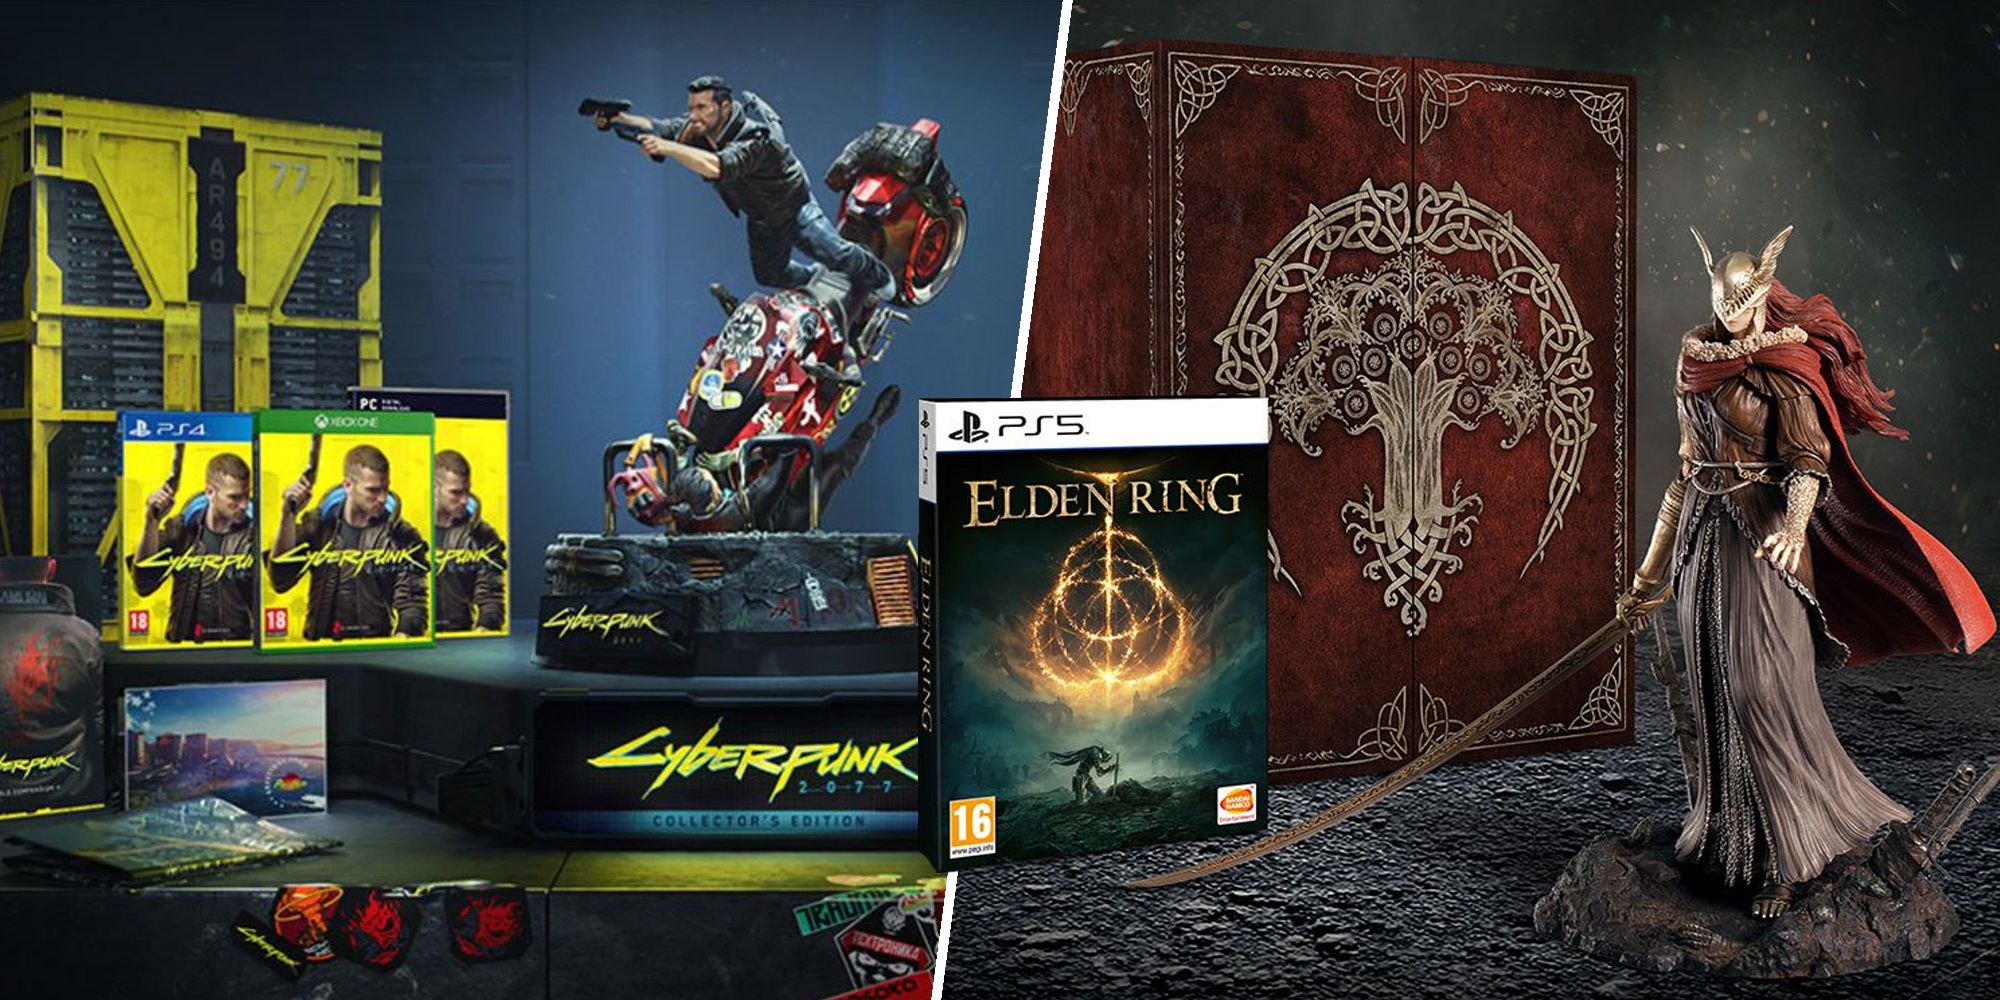  Elden Ring: Collector's Edition - Xbox Series X : Video Games